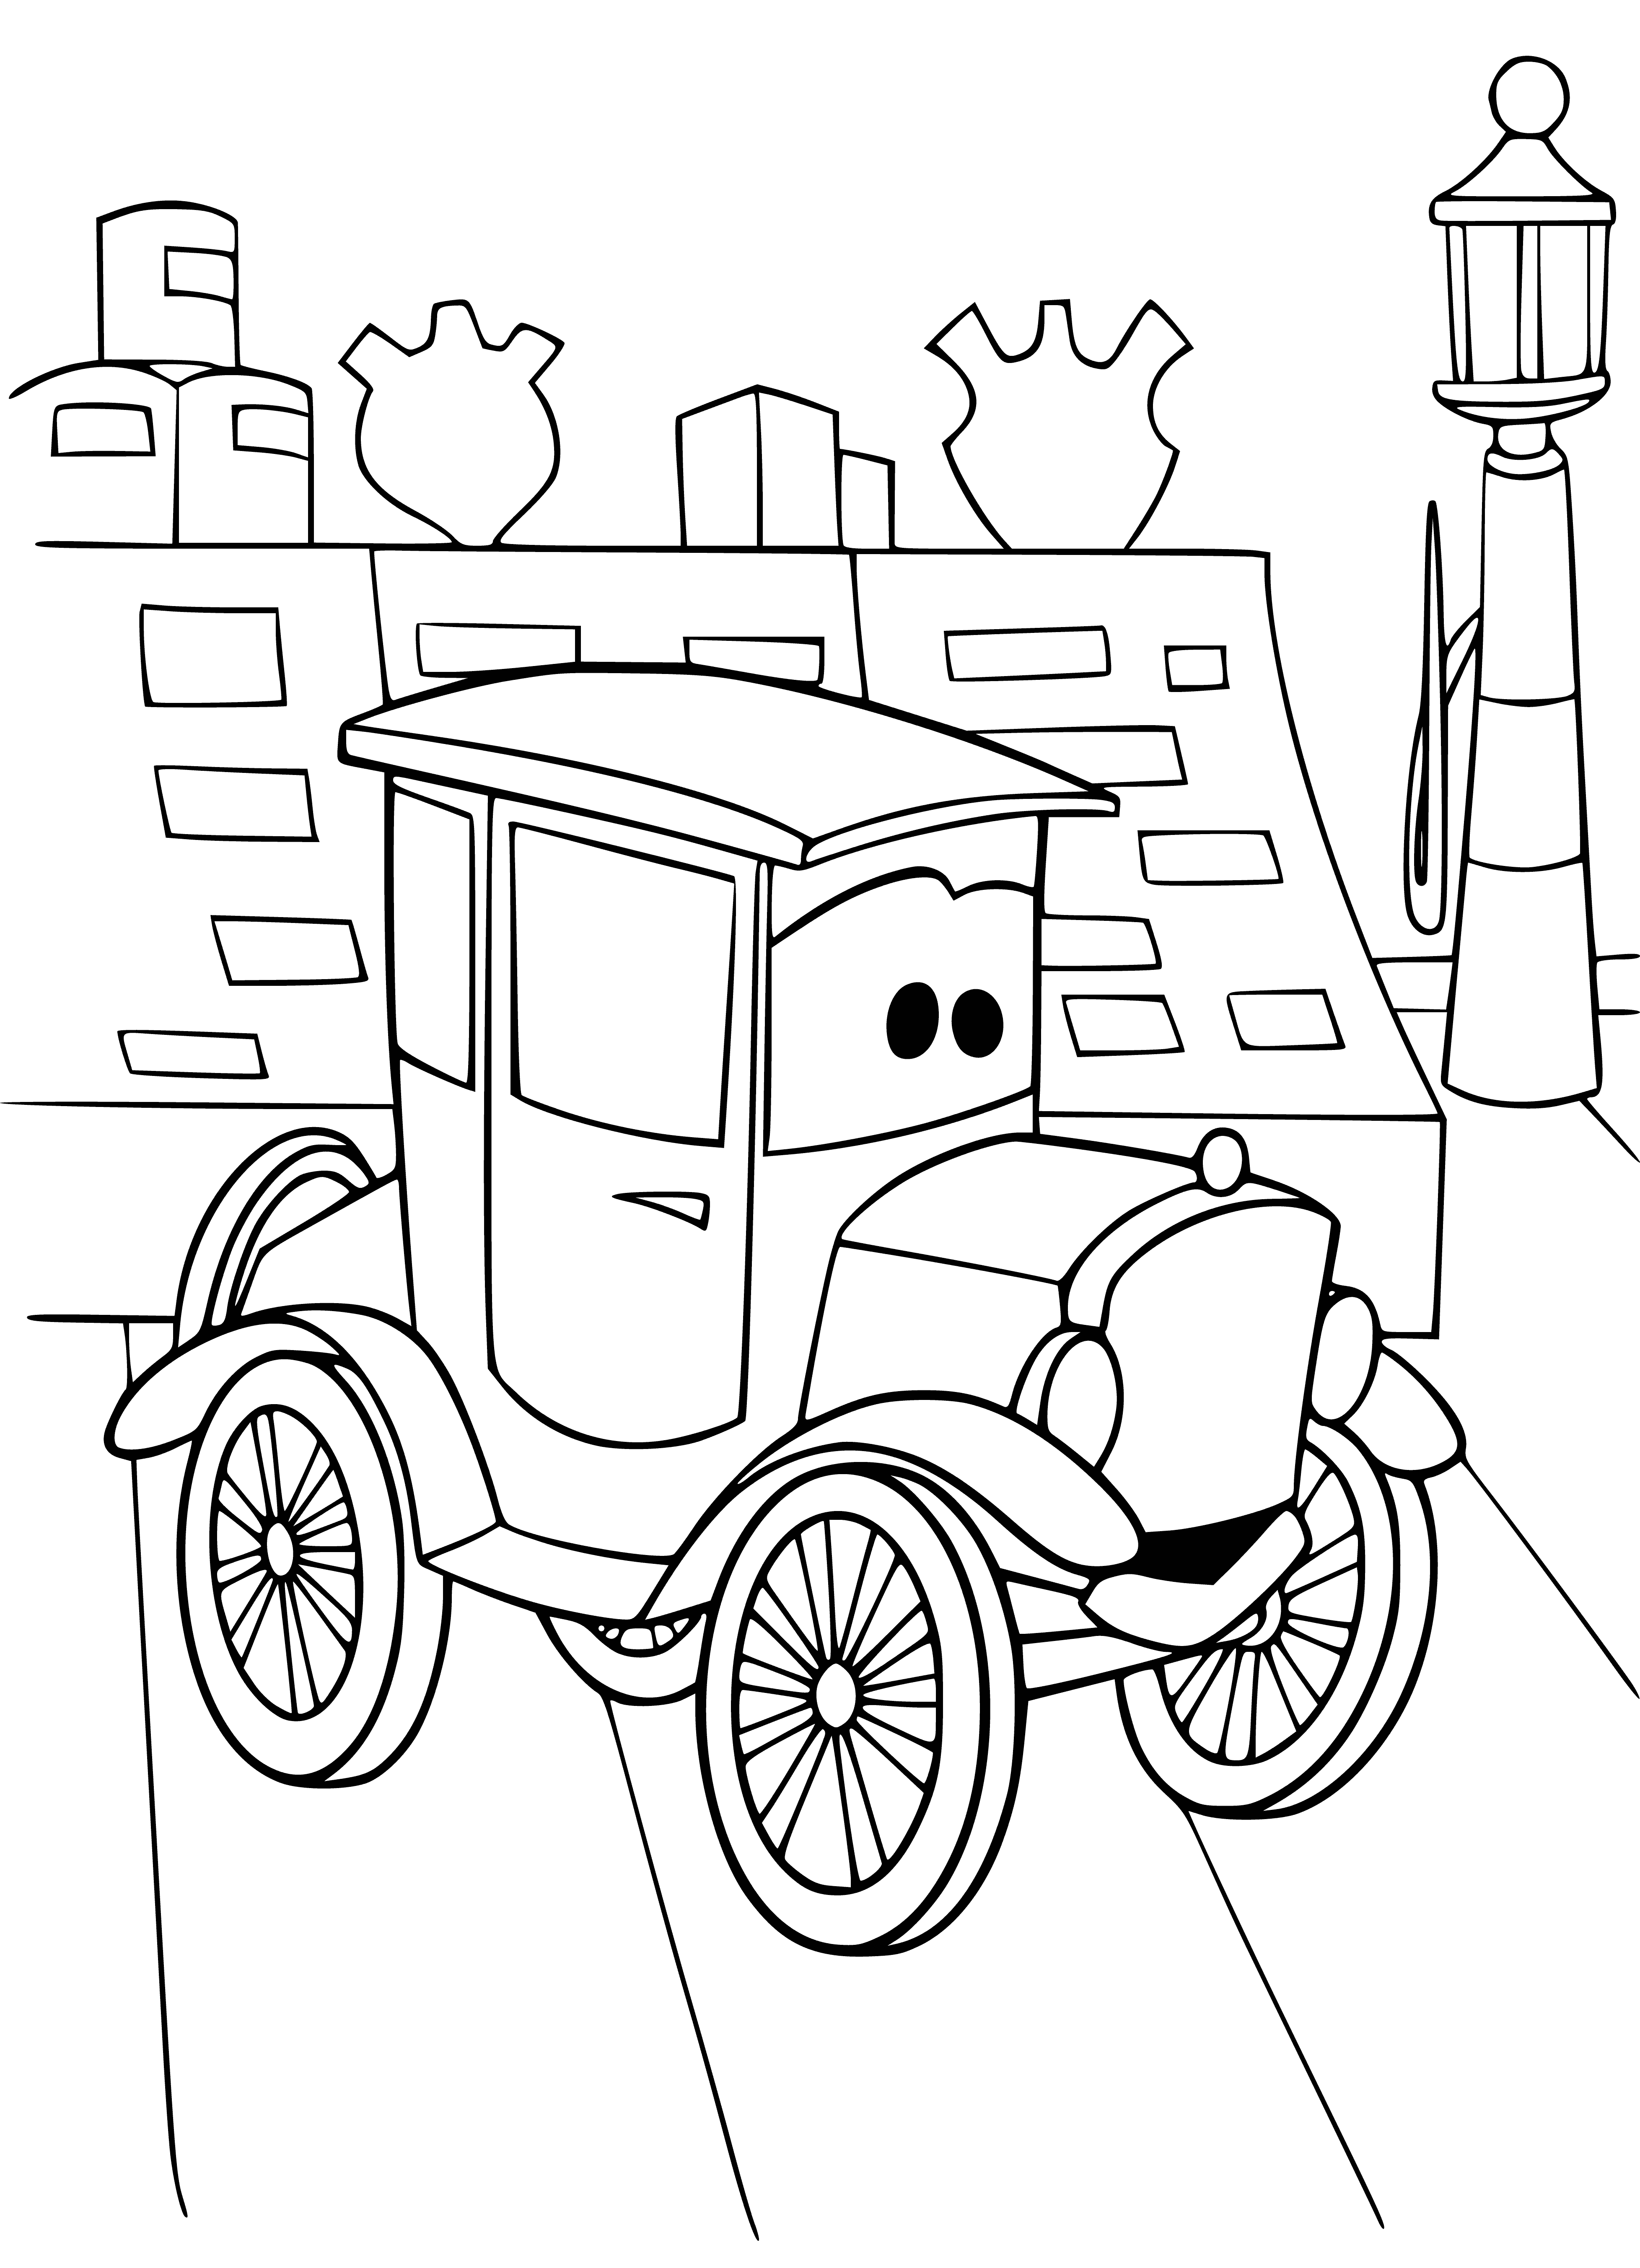 coloring page: Old car with 4 doors in good condition; dark color with a shine.